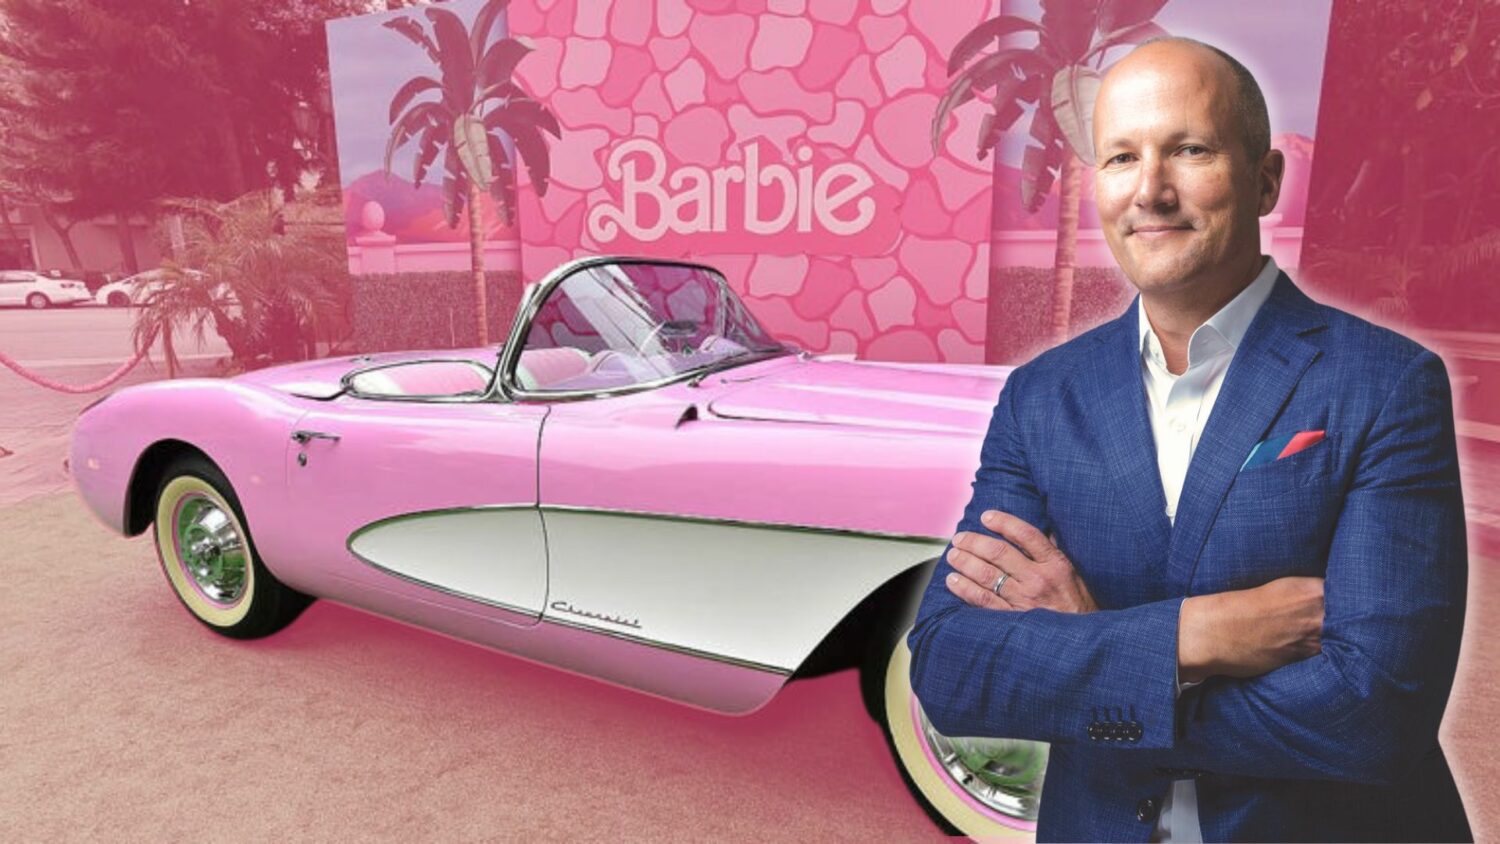 According to an Auto Trader report, the number of people interested in buying a “Chevy Convertible Corvette” has increased by 120% since the release of the “Barbie” trailer.